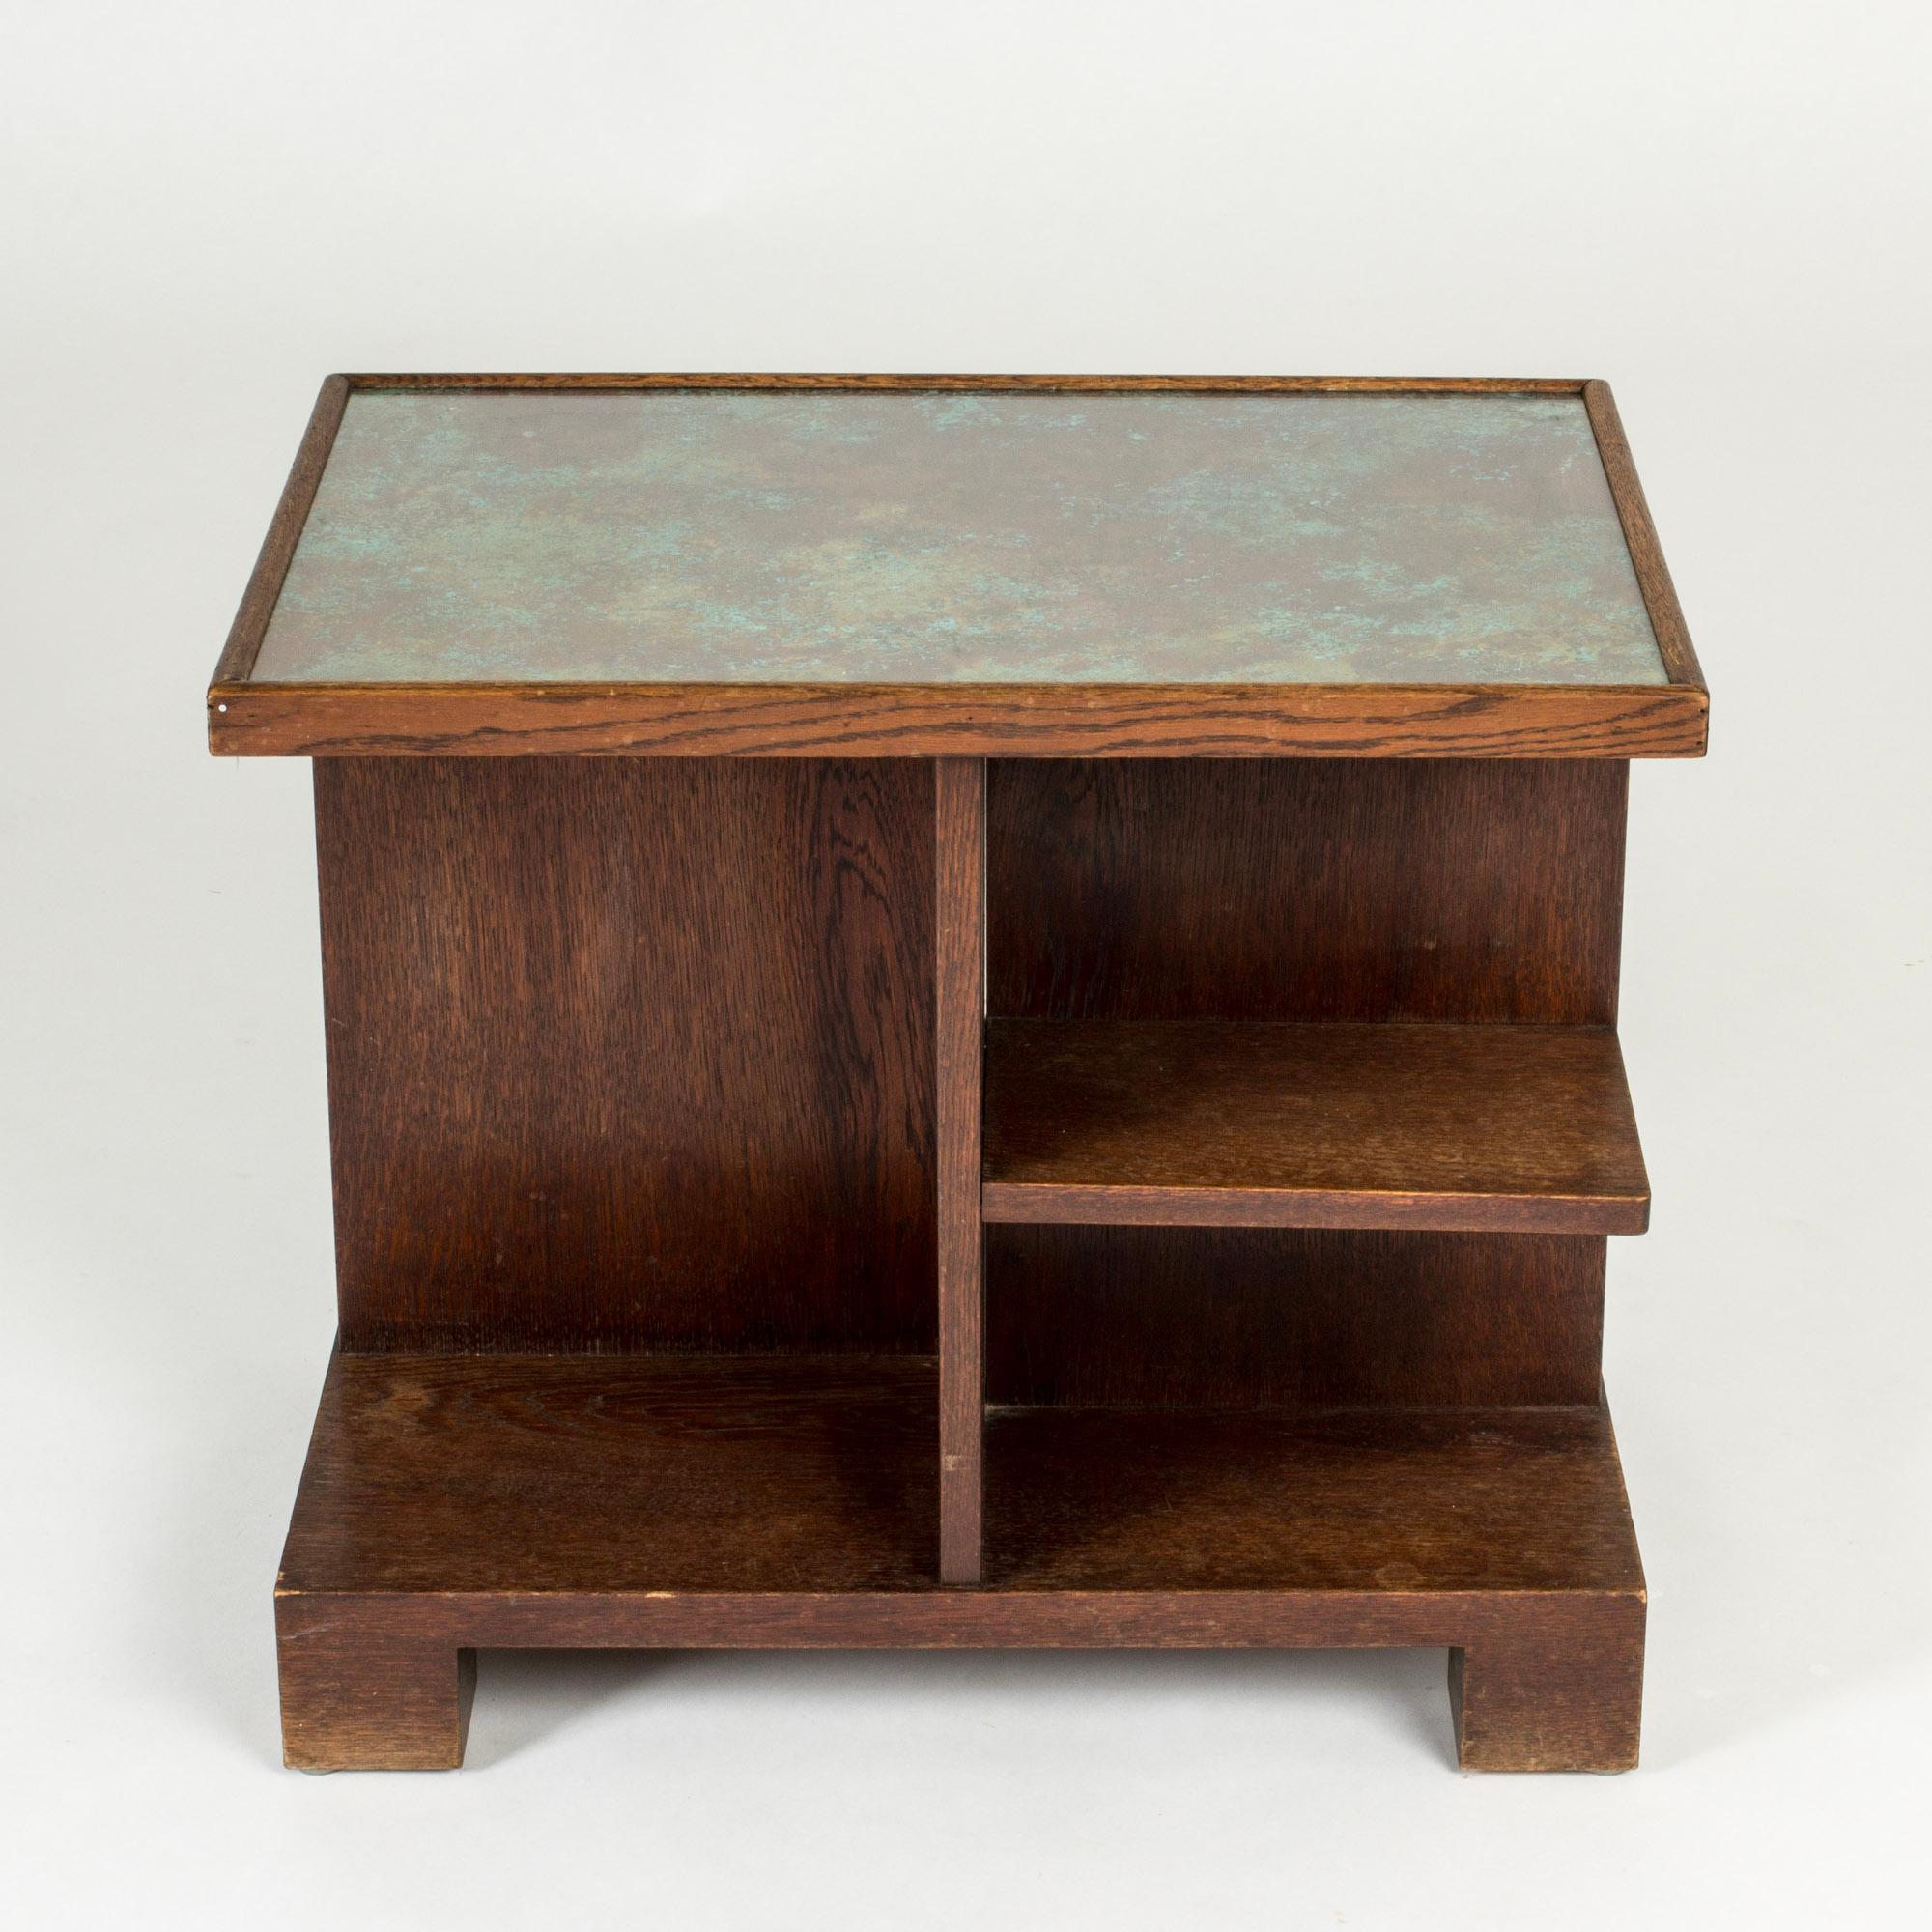 Scandinavian Modern Functionalist Console table by Axel Larsson, Bodafors, Sweden, 1930s For Sale